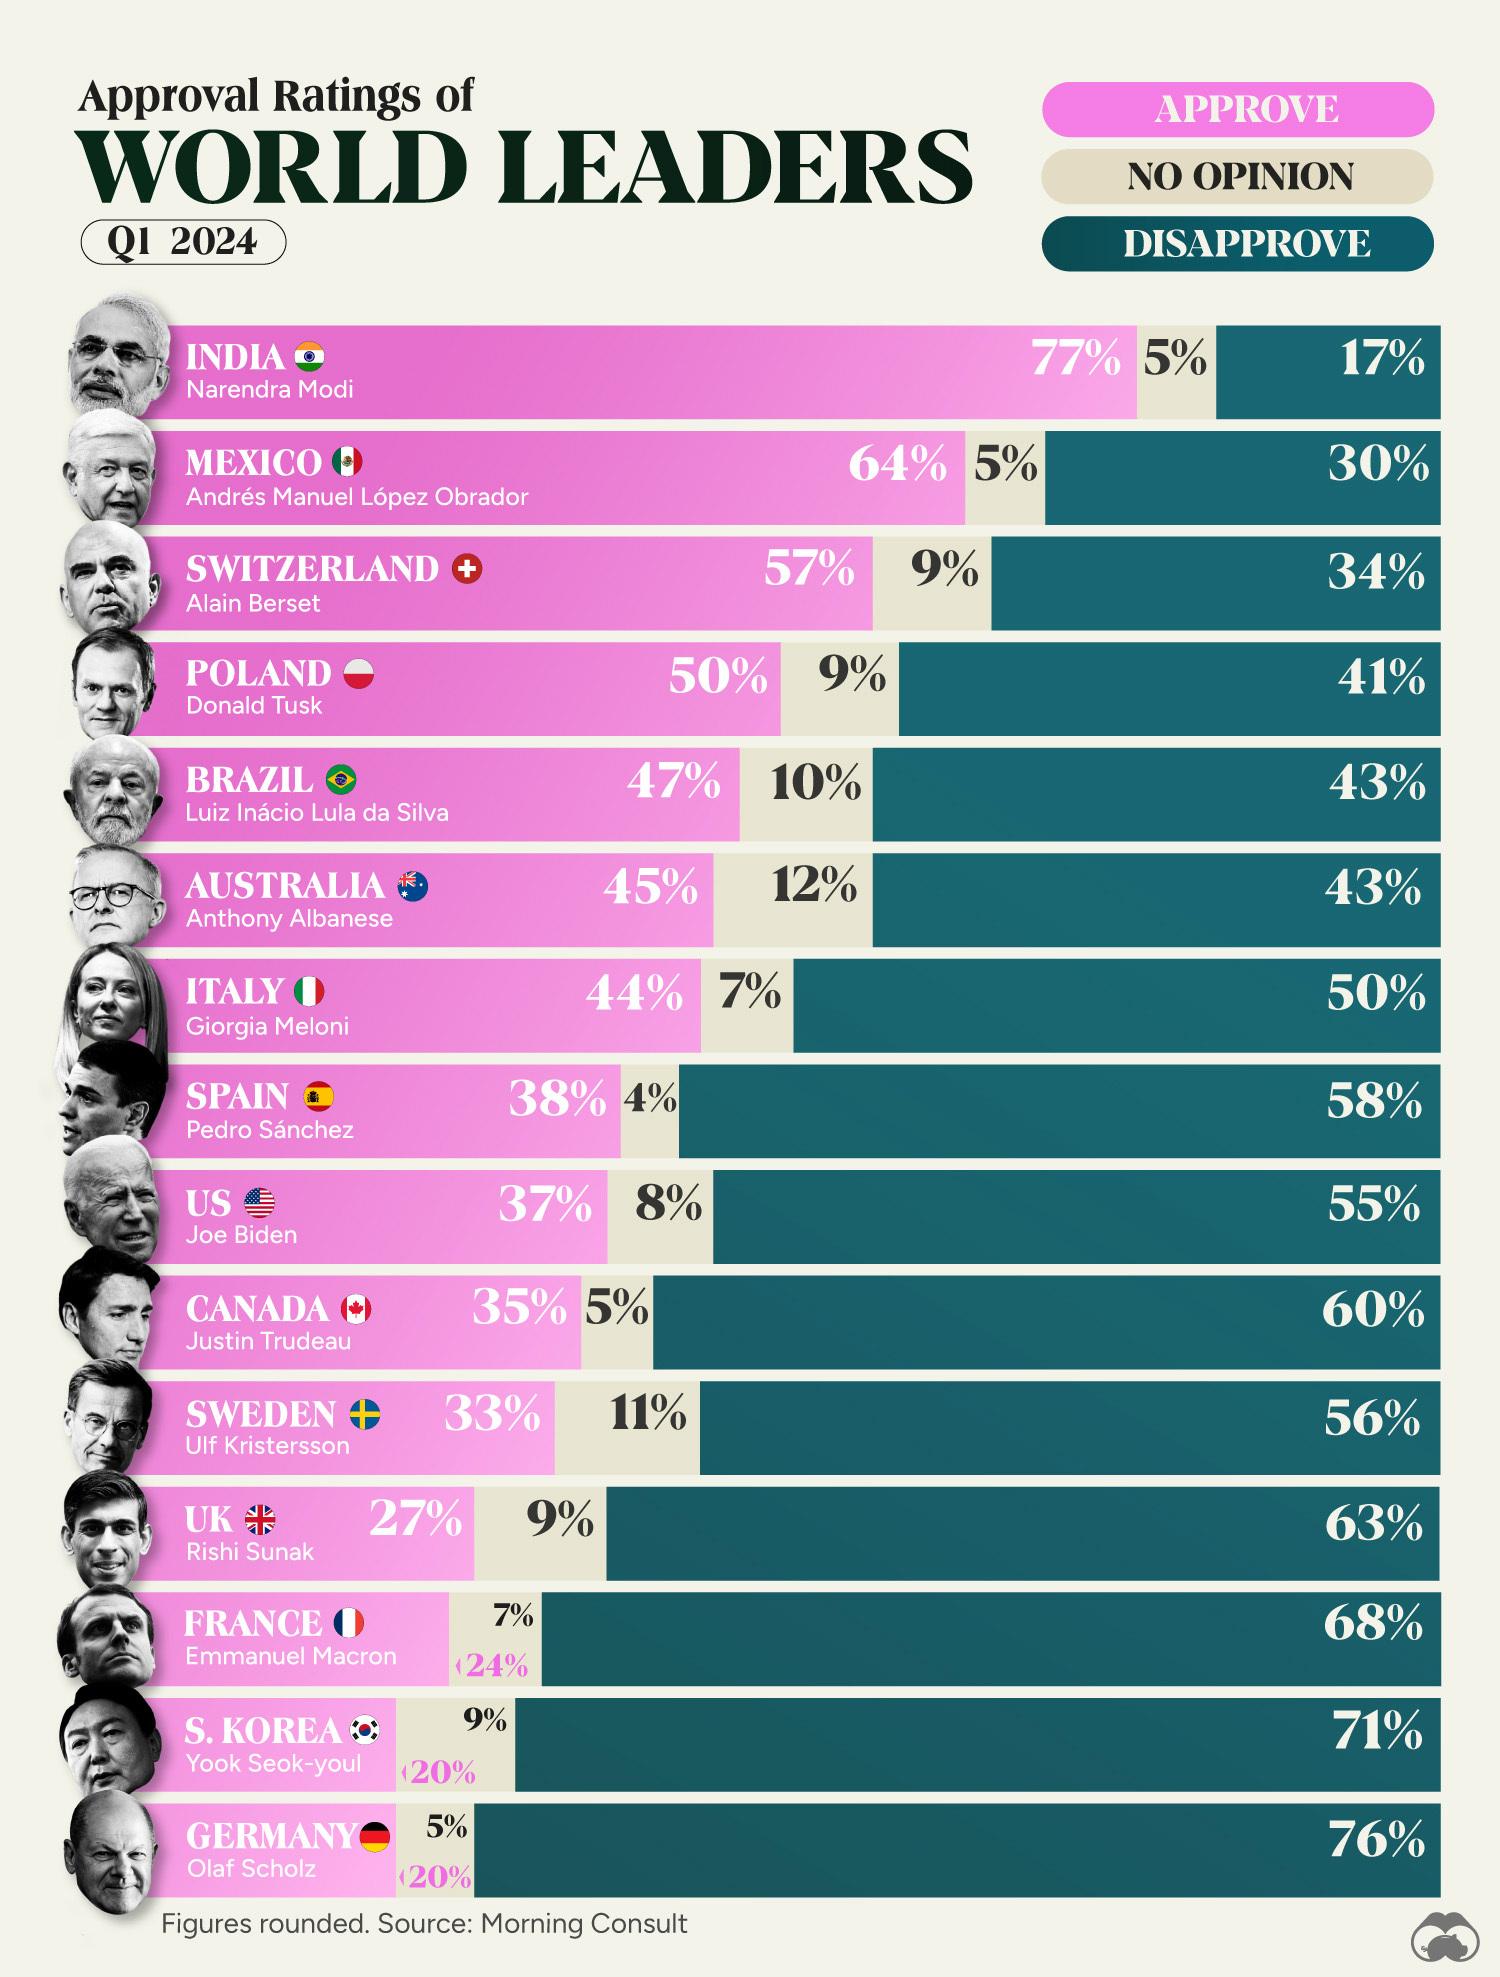 Approval Ratings of World Leaders